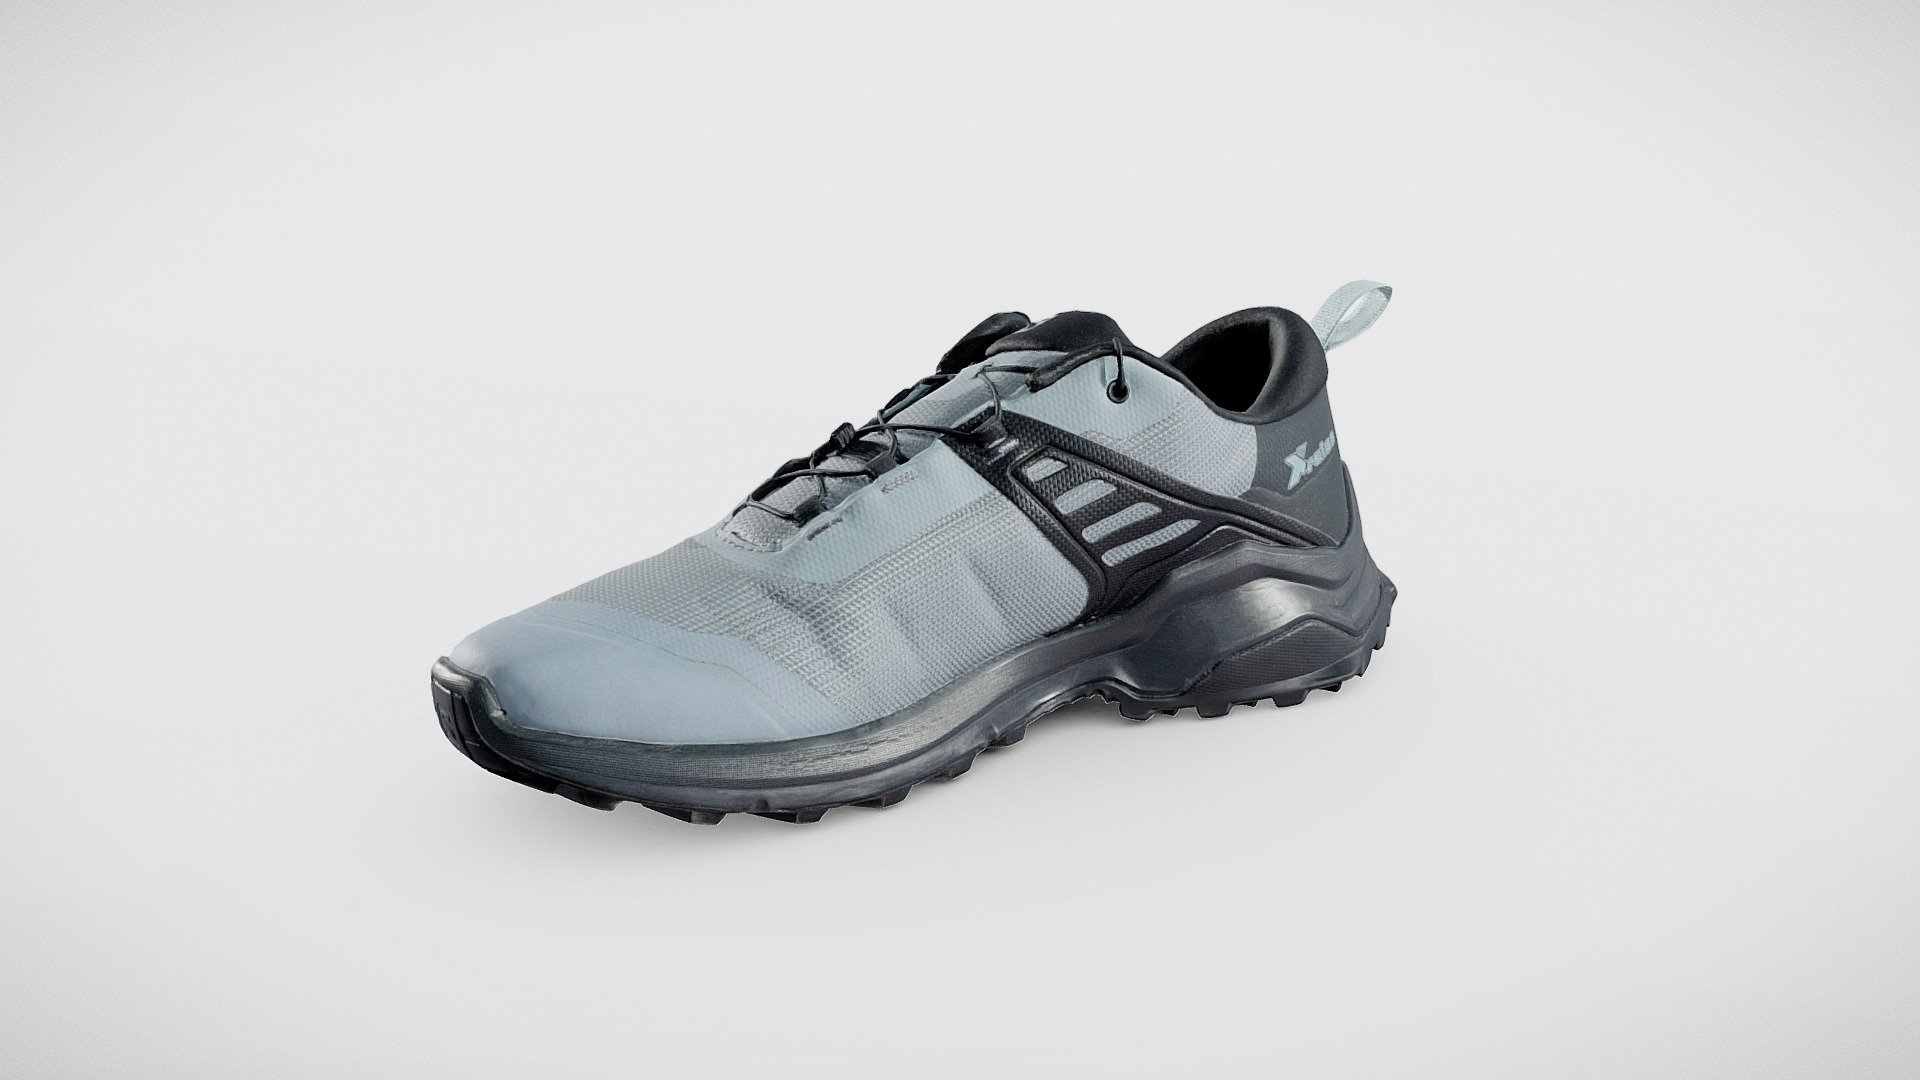 Salomon Men's X RAISE Hiking 

The Salomon X RAISE hiking shoe features a modern, athletic look &amp; is designed with features to support stability, comfort, &amp; performance so no matter the trail, you can go the distance.

32.0 x 11.4 x 12.2 cm (116 micrometers per texel @ 4k)

Scanned using advanced technology developed by inciprocal Inc. that enables highly photo-realistic reproduction of real-world products in virtual environments. Our hardware and software technology combines advanced photometry, structured light, photogrammtery and light fields to capture and generate accurate material representations from tens of thousands of images targeting real-time and offline path-traced PBR compatible renderers.

Zip file includes low-poly OBJ mesh (in meters) with a set of 4k PBR textures compressed with lossless JPEG (no chroma sub-sampling) 3d model